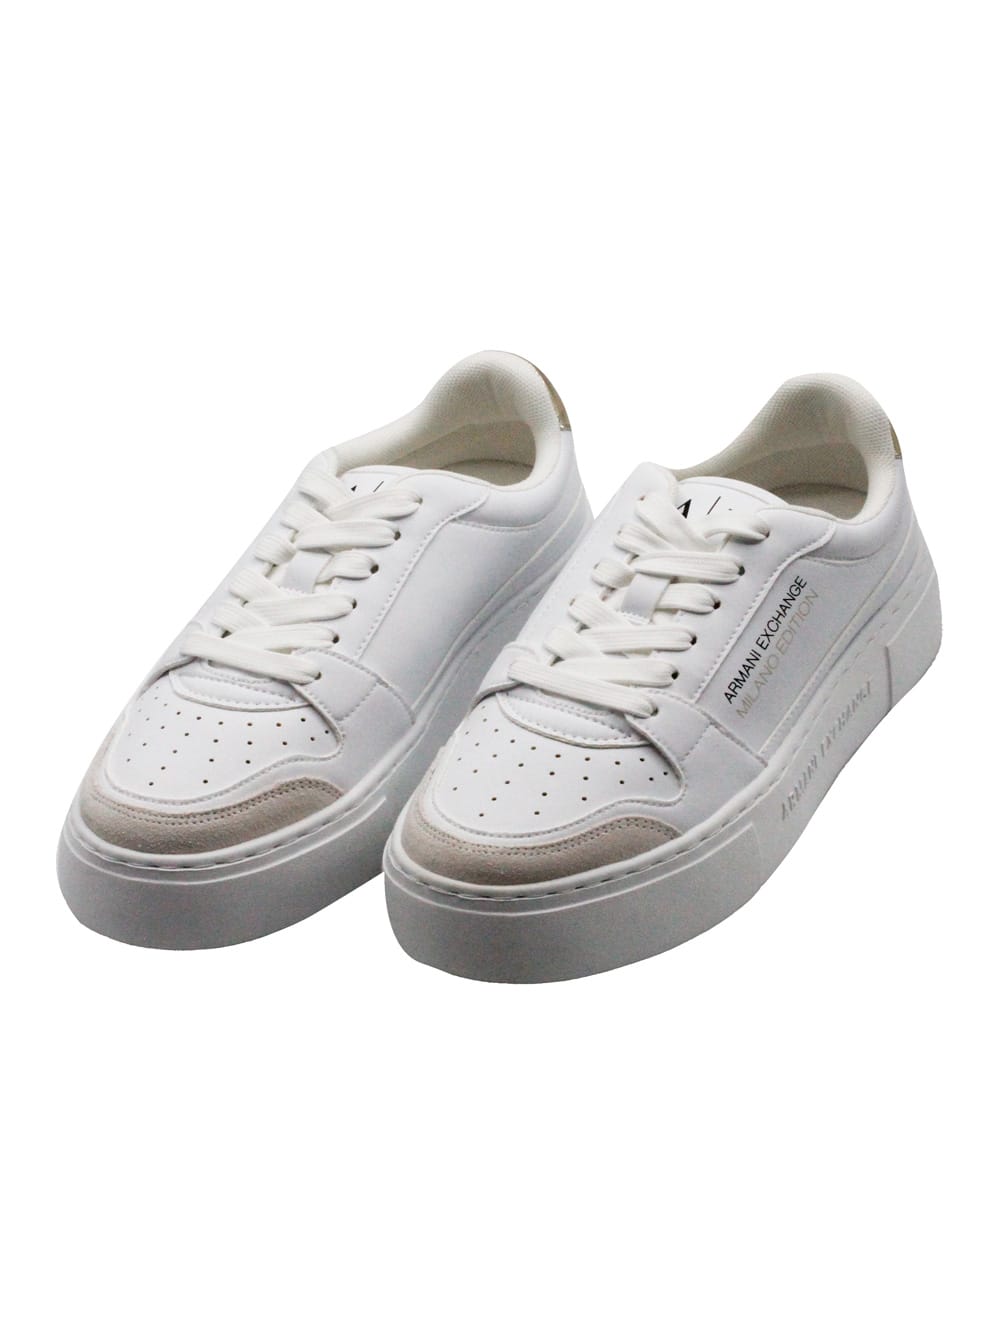 Armani Collezioni Leather Trainers With Matching Box Sole And Lace Closure. Small Golden Rear Logo And Side Writing In White